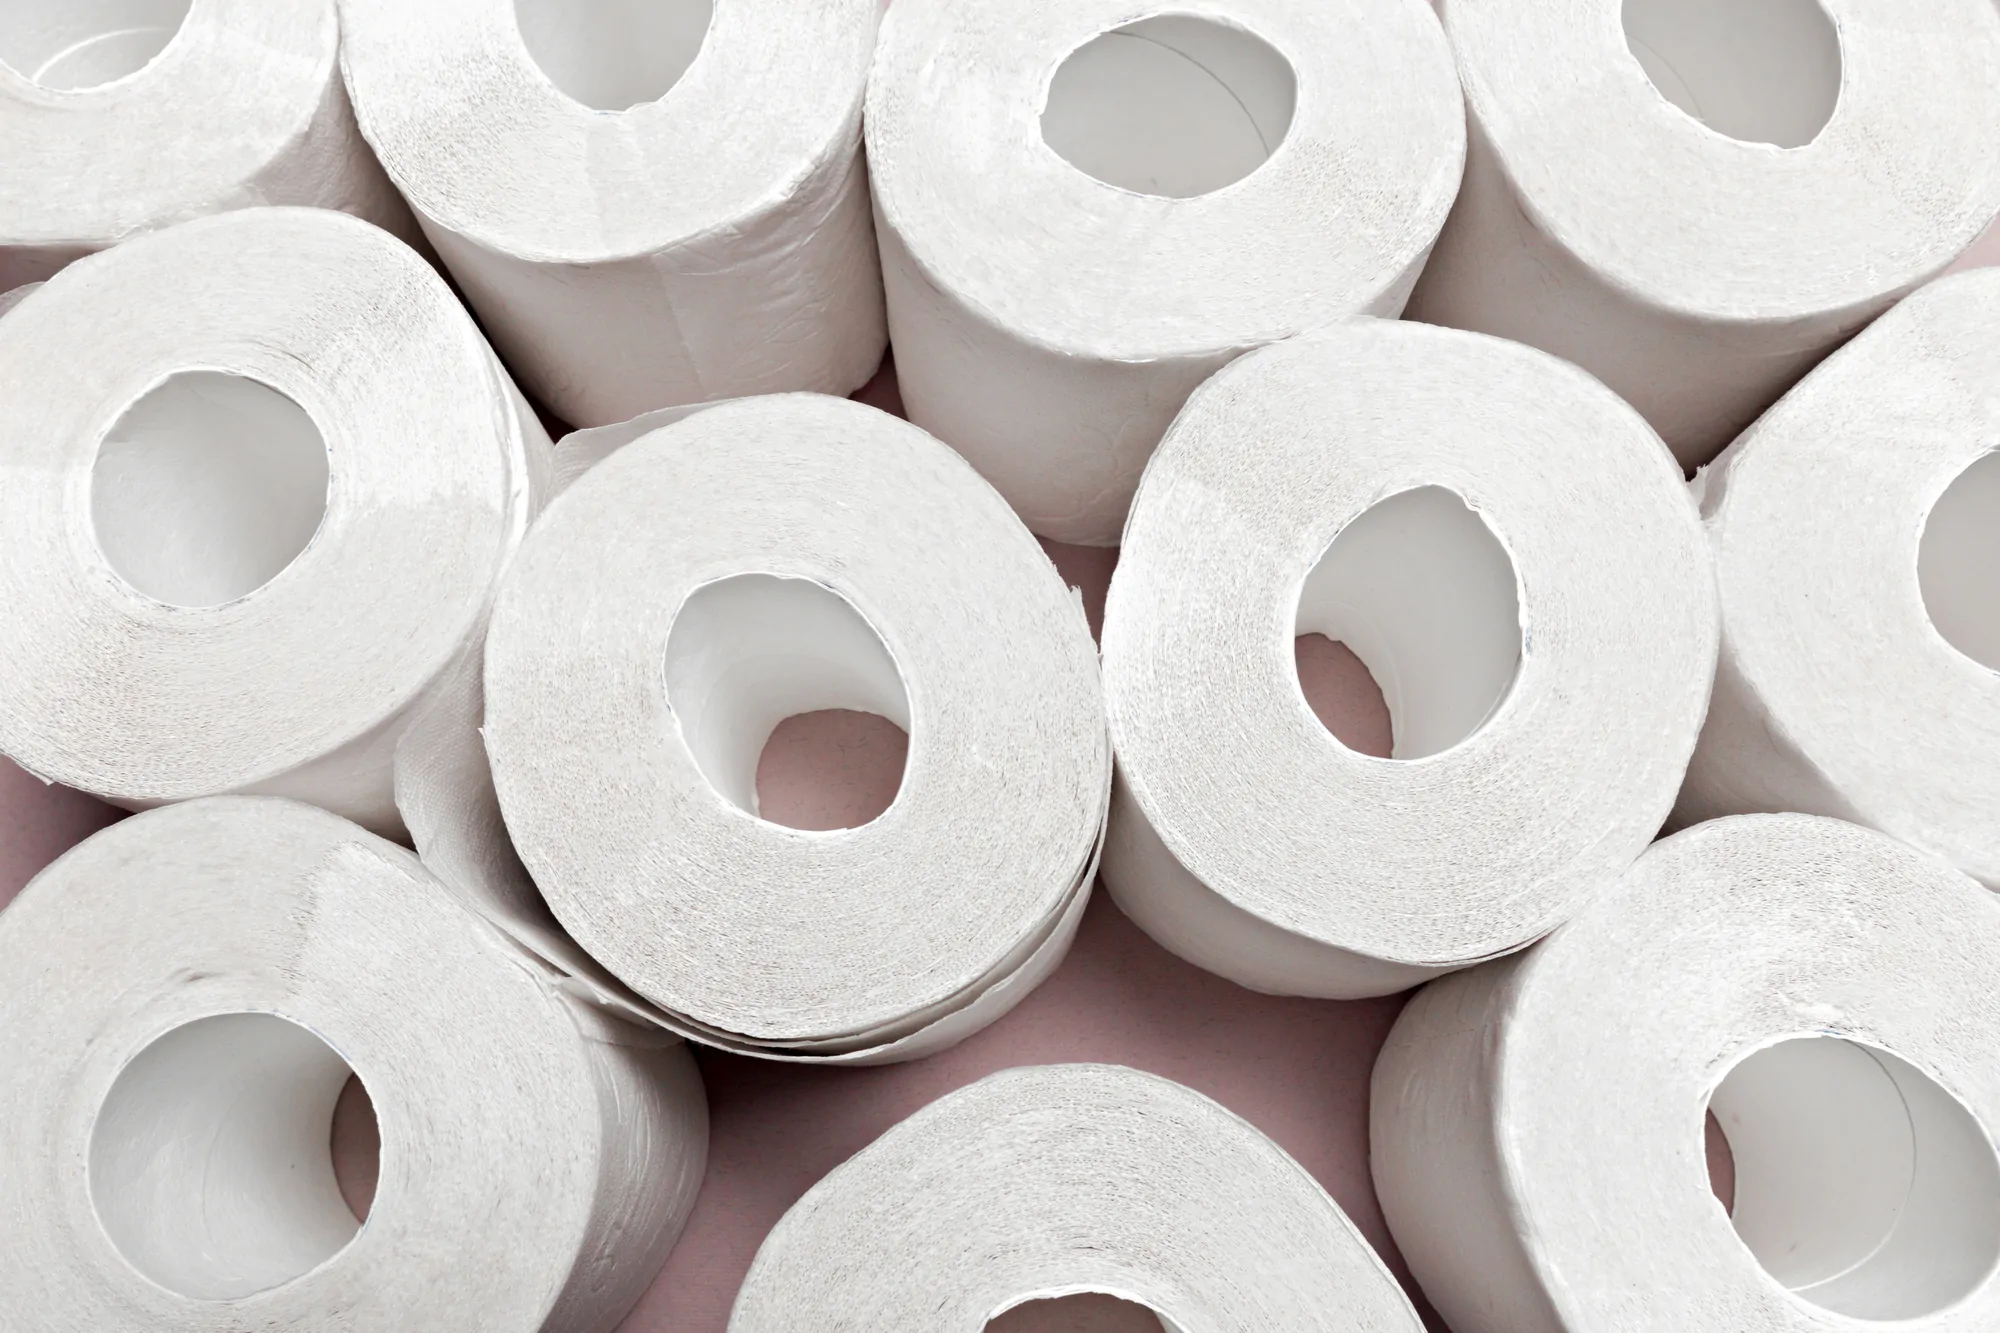 How Toxic Is Your Toilet Paper? Investigation of Brands 4